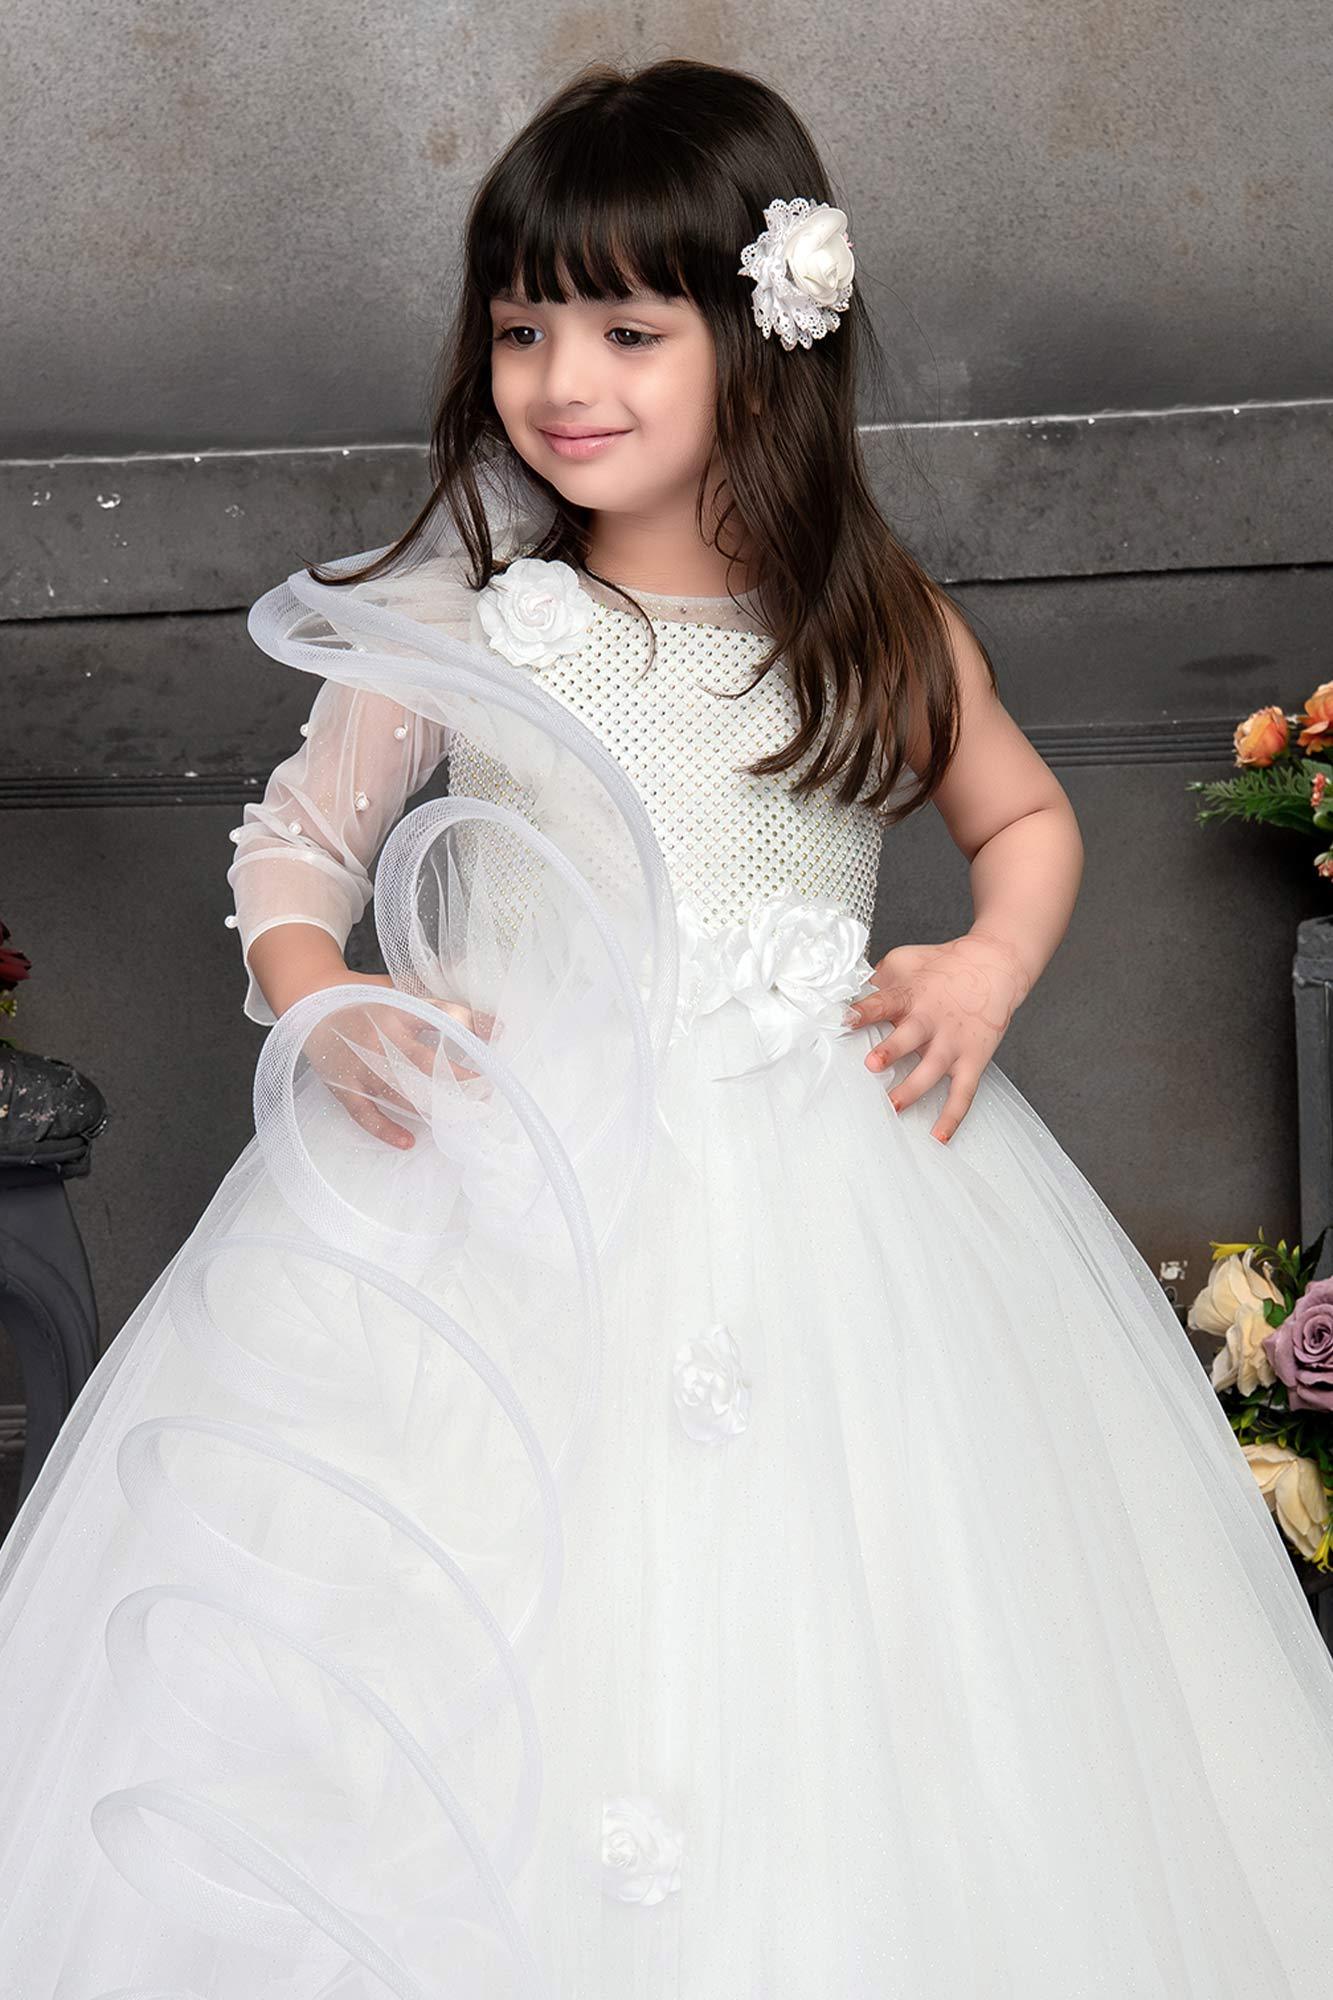 Snow White Princess Party Gown: A Royal Look for Girls. - Lagorii Kids